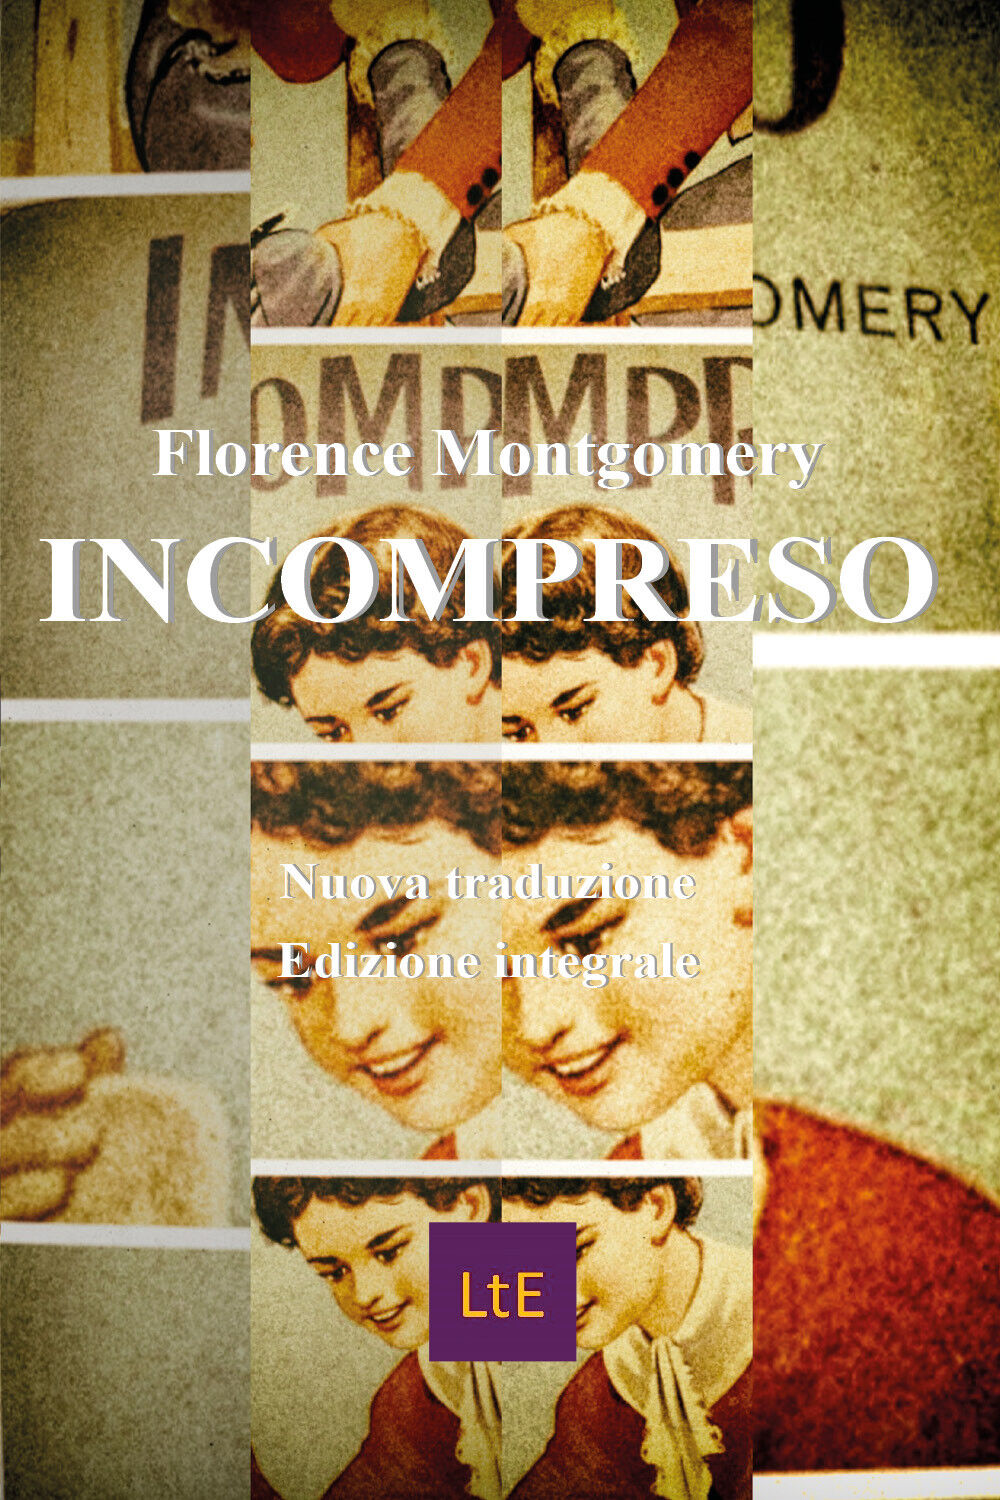   Incompreso - Florence Montgomery,  2020,  Youcanprint